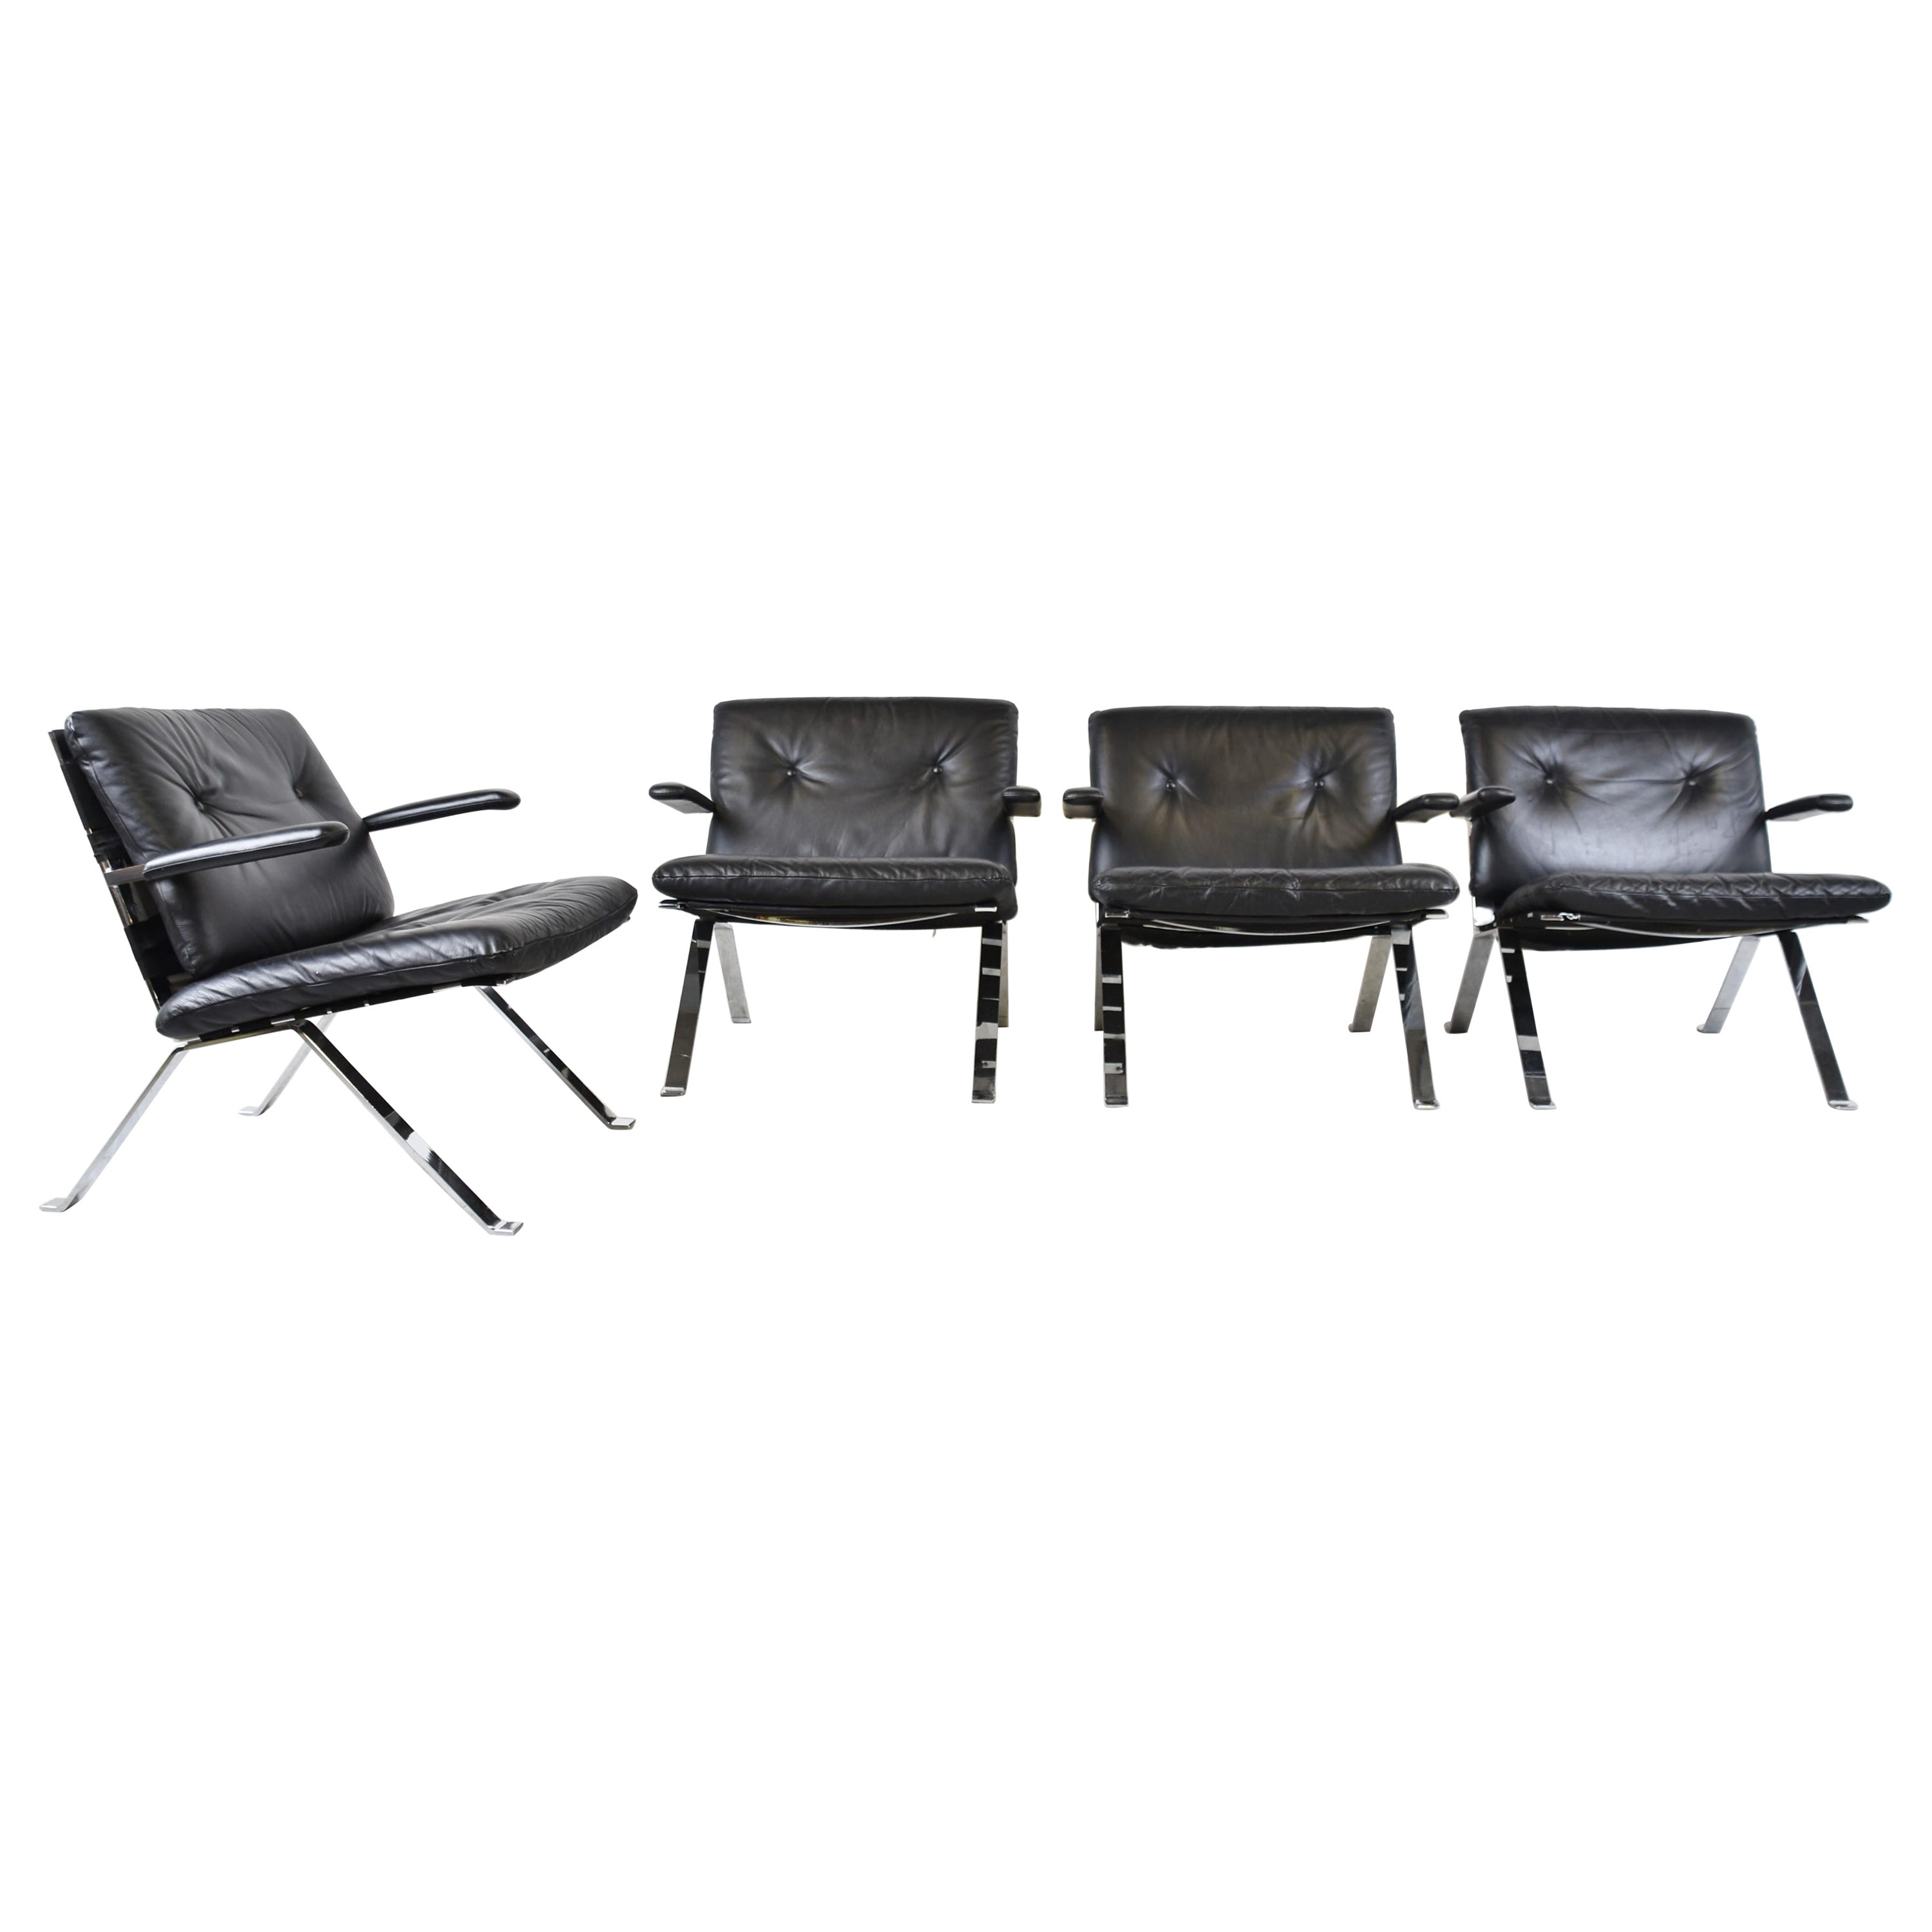 Set of 4 Leather Lounge Chairs Model 1600 by Hans Eichenberger for Girsberg For Sale